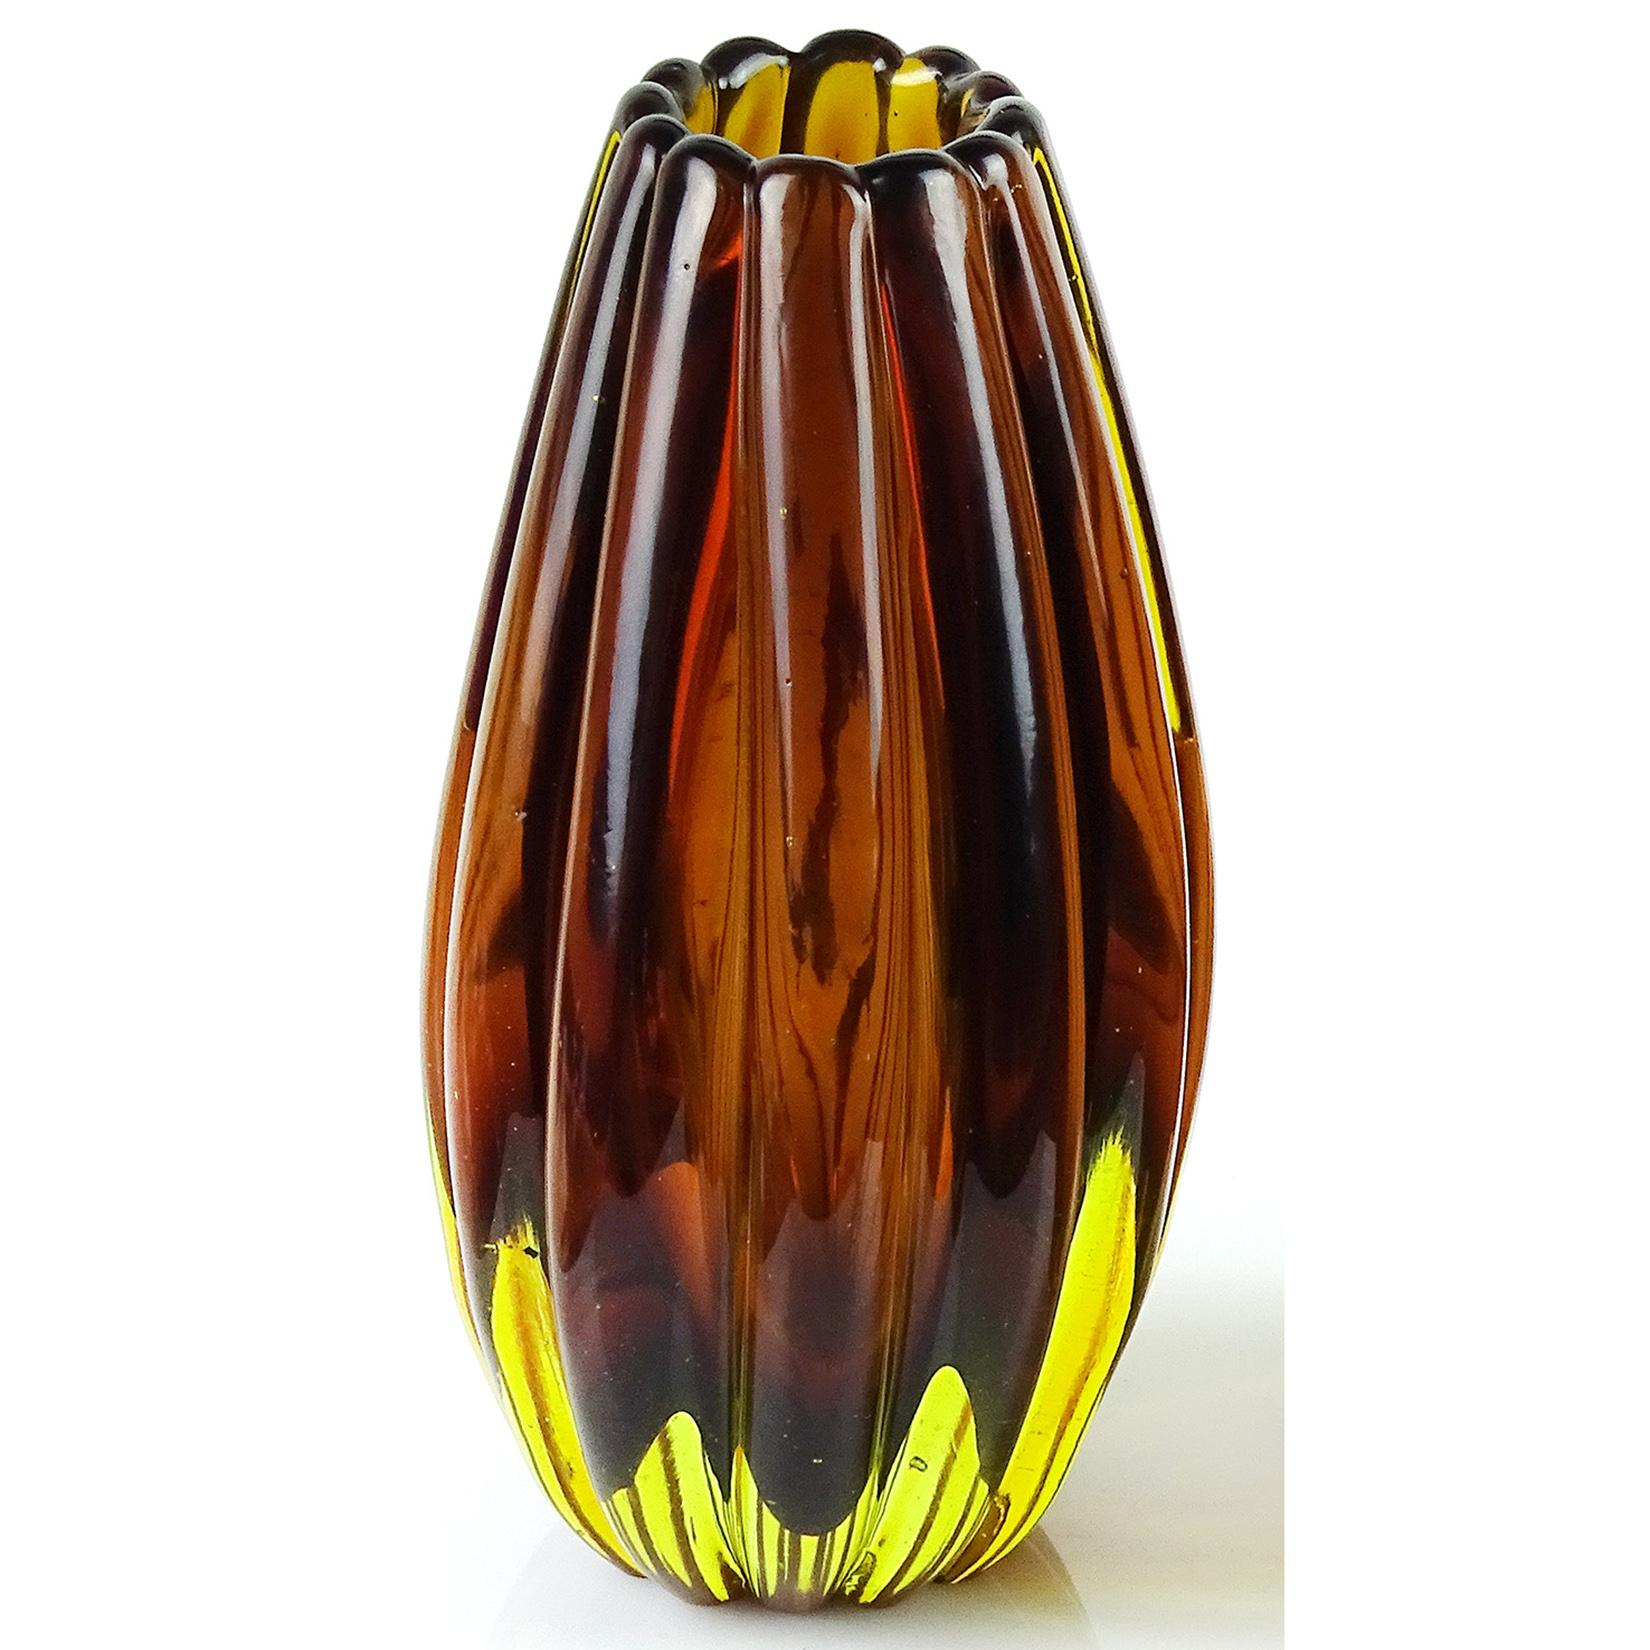 Beautiful vintage Murano hand blown Sommerso brown and yellow Italian art glass flower vase. Documented to designer Flavio Poli for the Seguso Vetri d'Arte company. It is published as model number 12024, circa 1958. The vase has a ribbed body